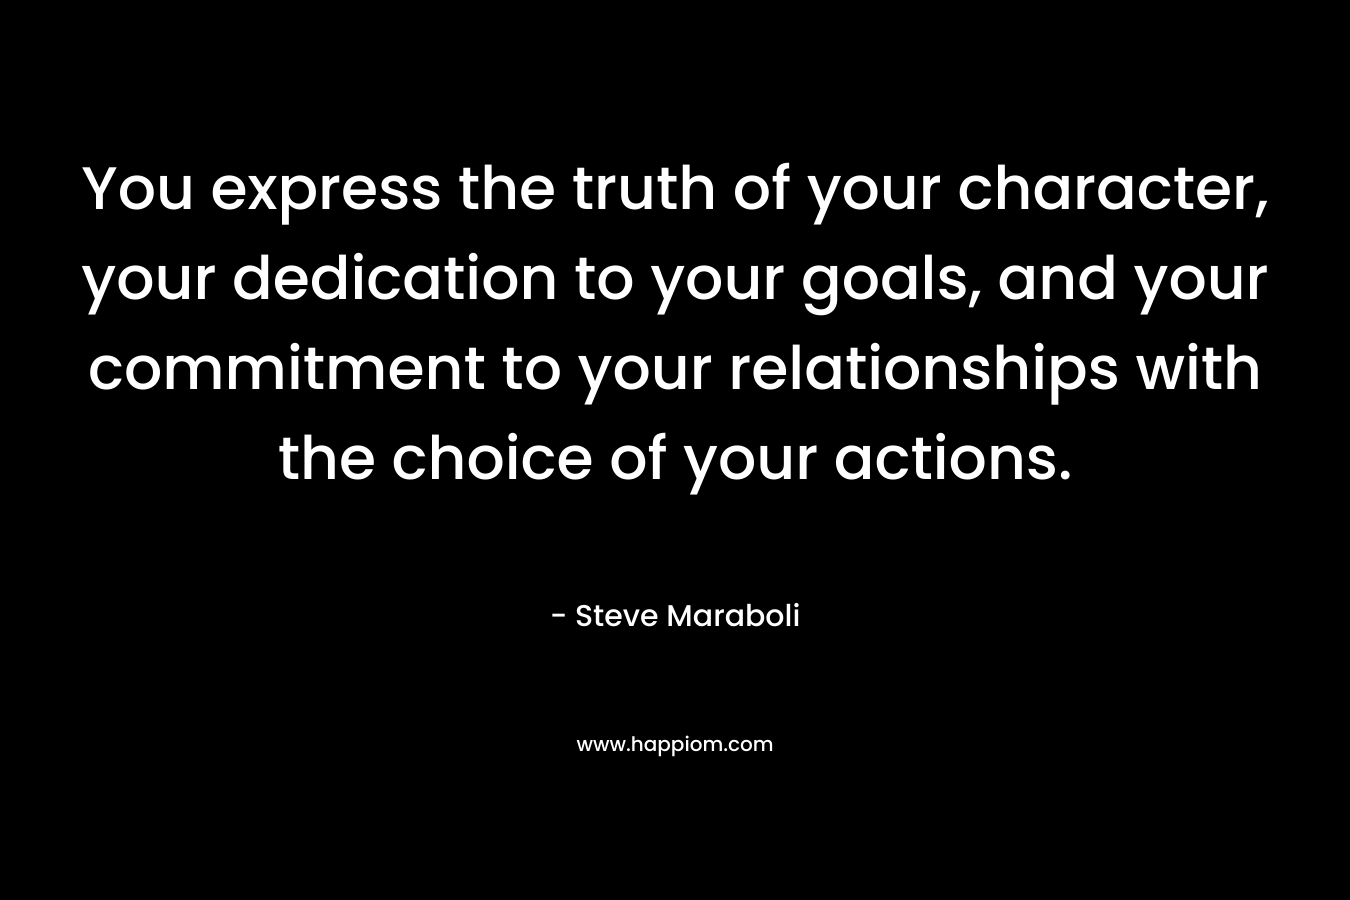 You express the truth of your character, your dedication to your goals, and your commitment to your relationships with the choice of your actions.